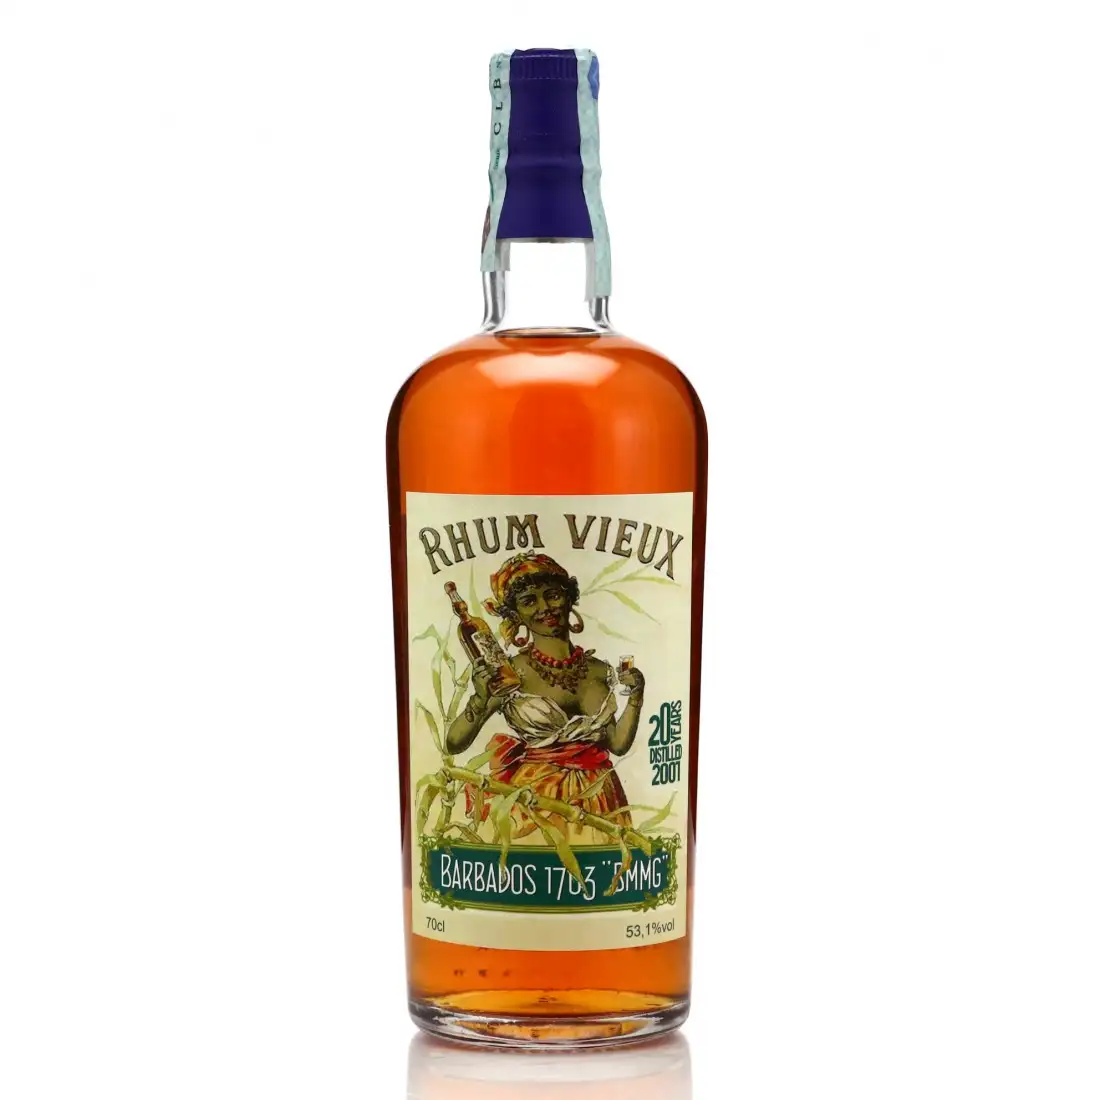 Image of the front of the bottle of the rum Barbados 1703 BMMG